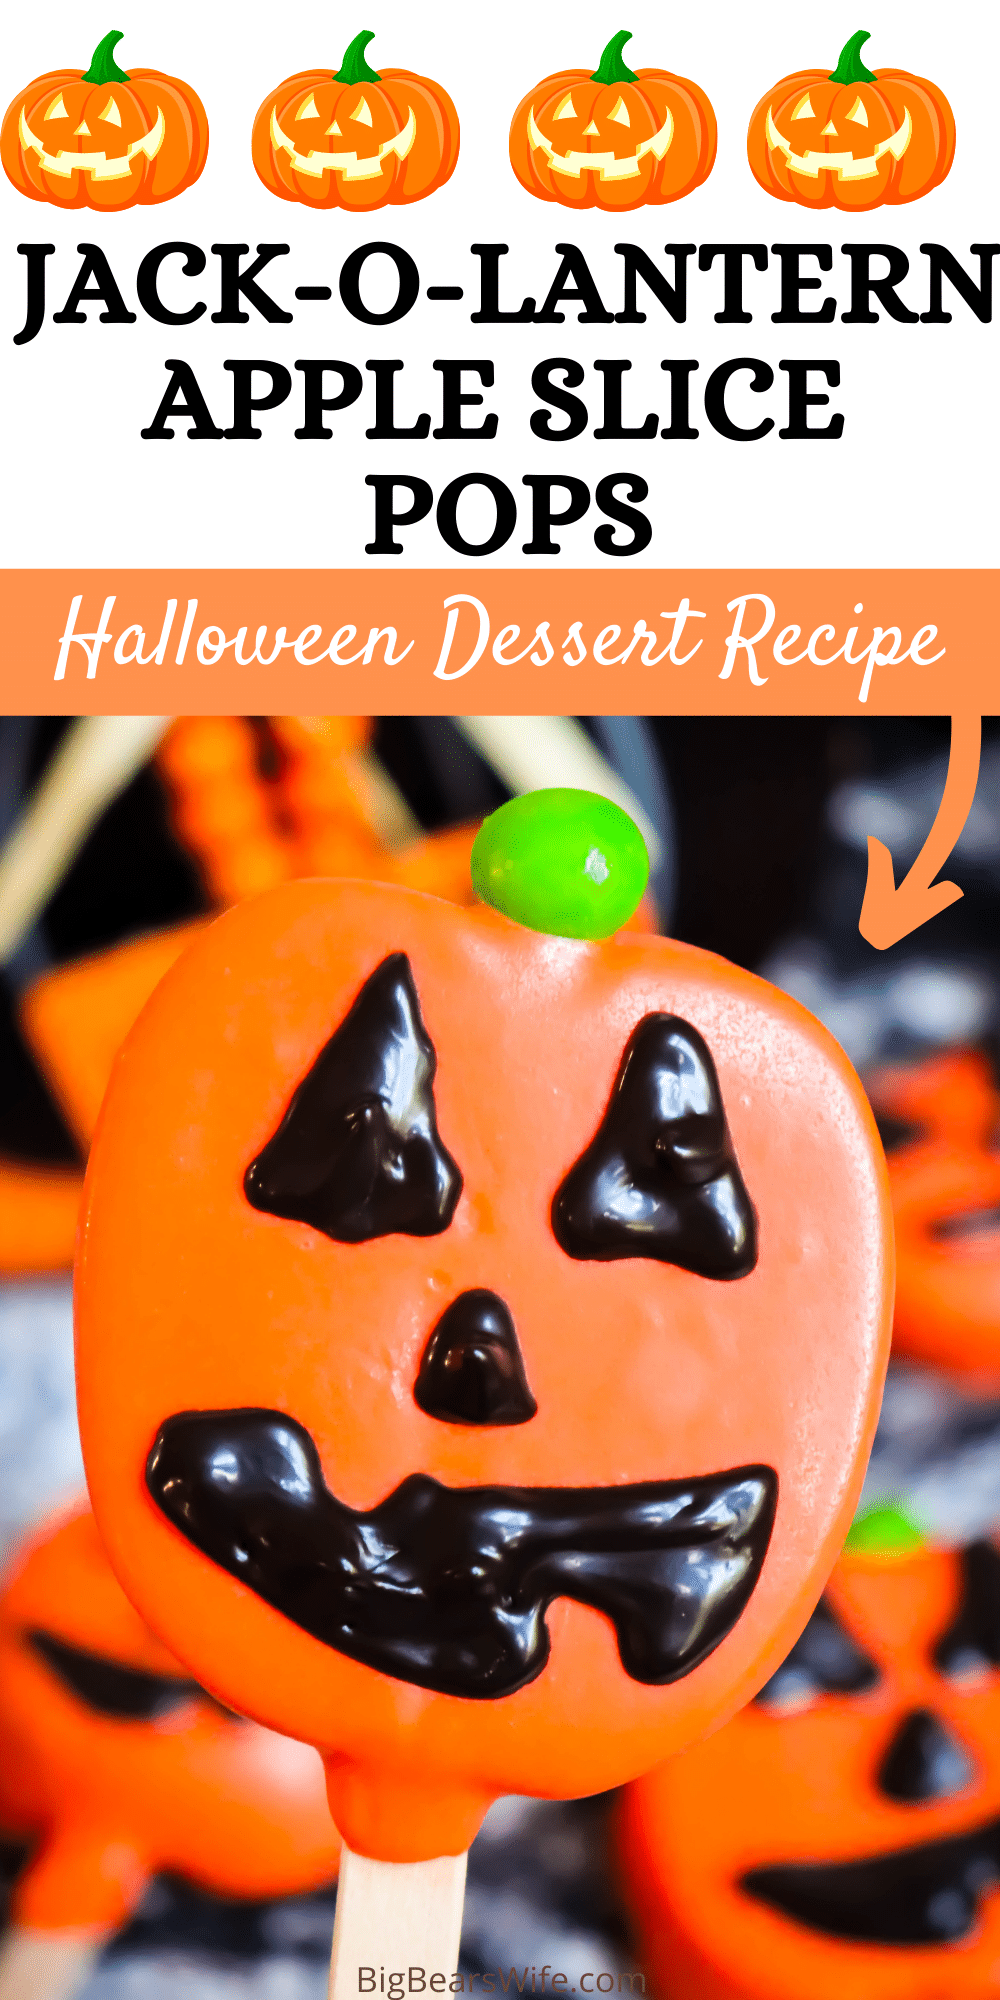 Jack-O-Lantern Apple Slice Pops - sliced apples dipped in melted orange candy coating and decorate to look like fun Jack-O-Lantern pumpkins! Fun and Easy Halloween Idea to make with kids! via @bigbearswife